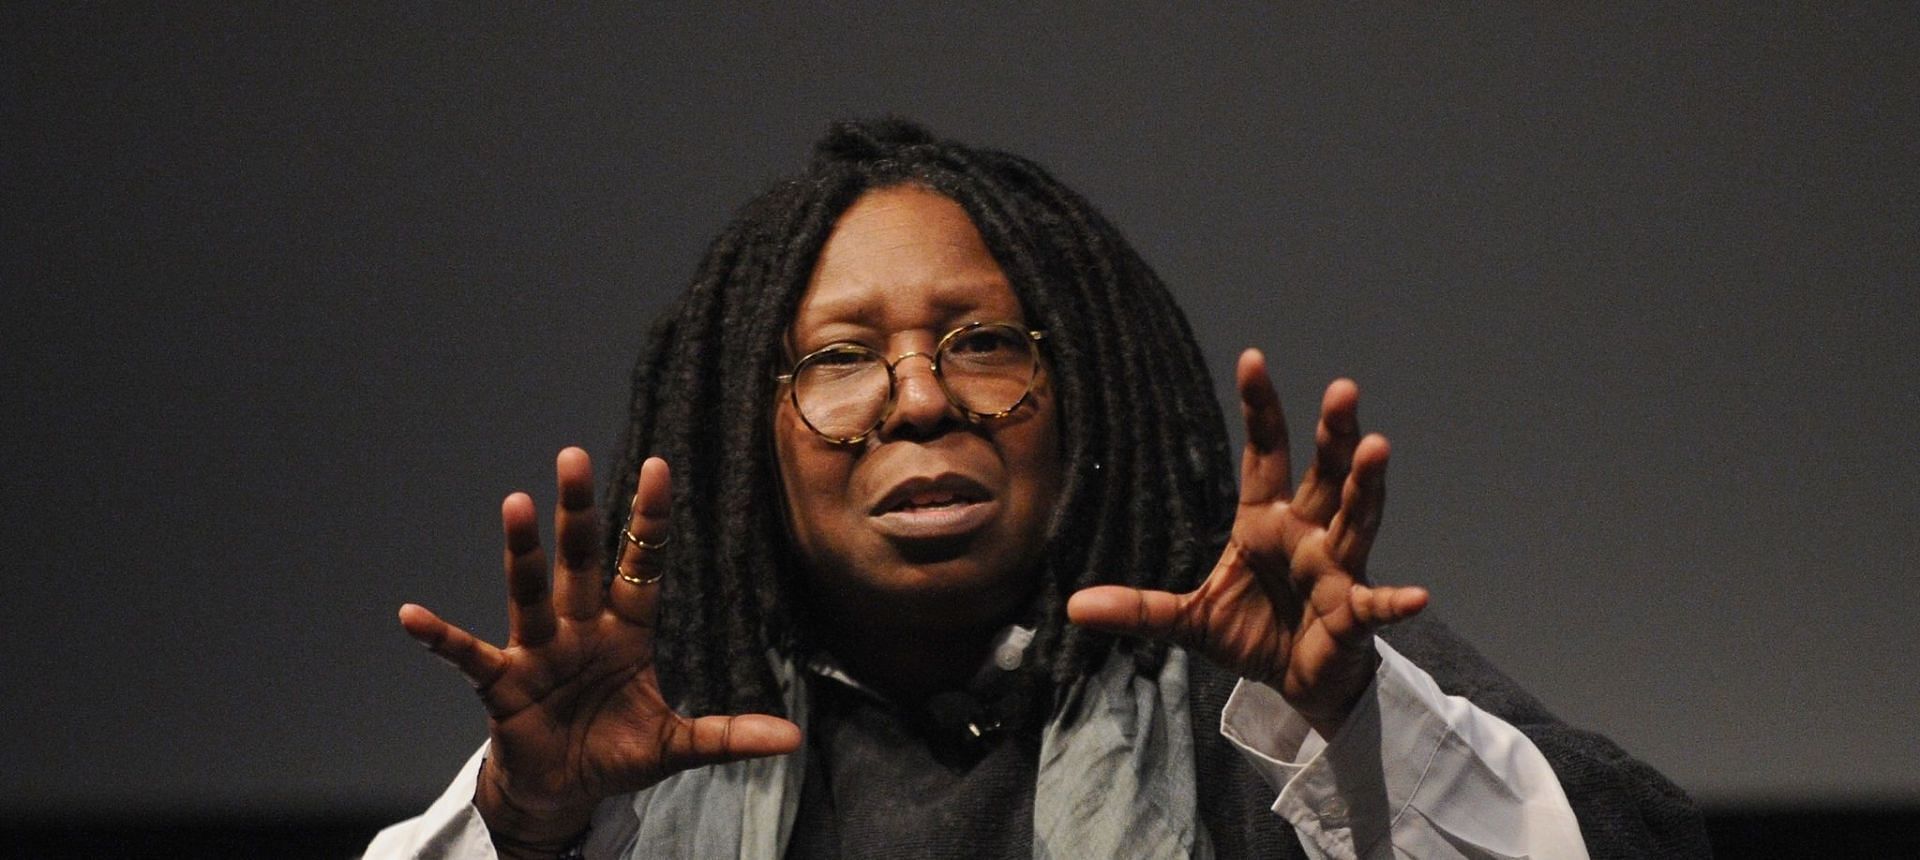 Whoopi Goldberg faced severe criticism for controversial comments on the Holocaust (Image via Bryan Bedder/Getty Images)